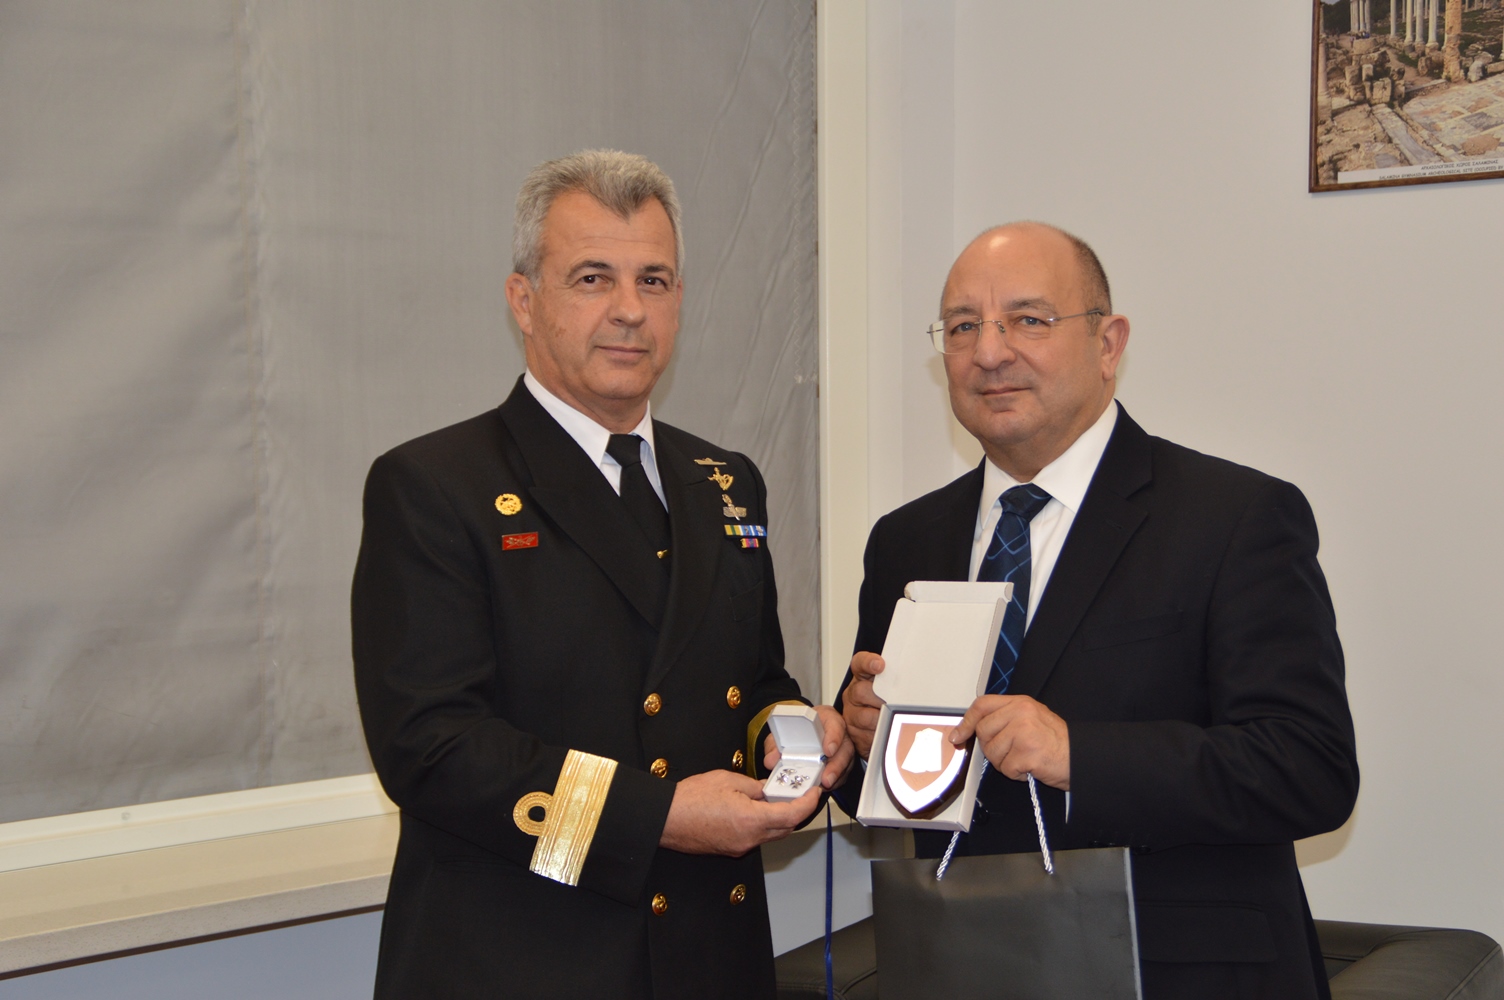 The Minister of Defence of the Republic of Malta, visits the JRCC Larnaca